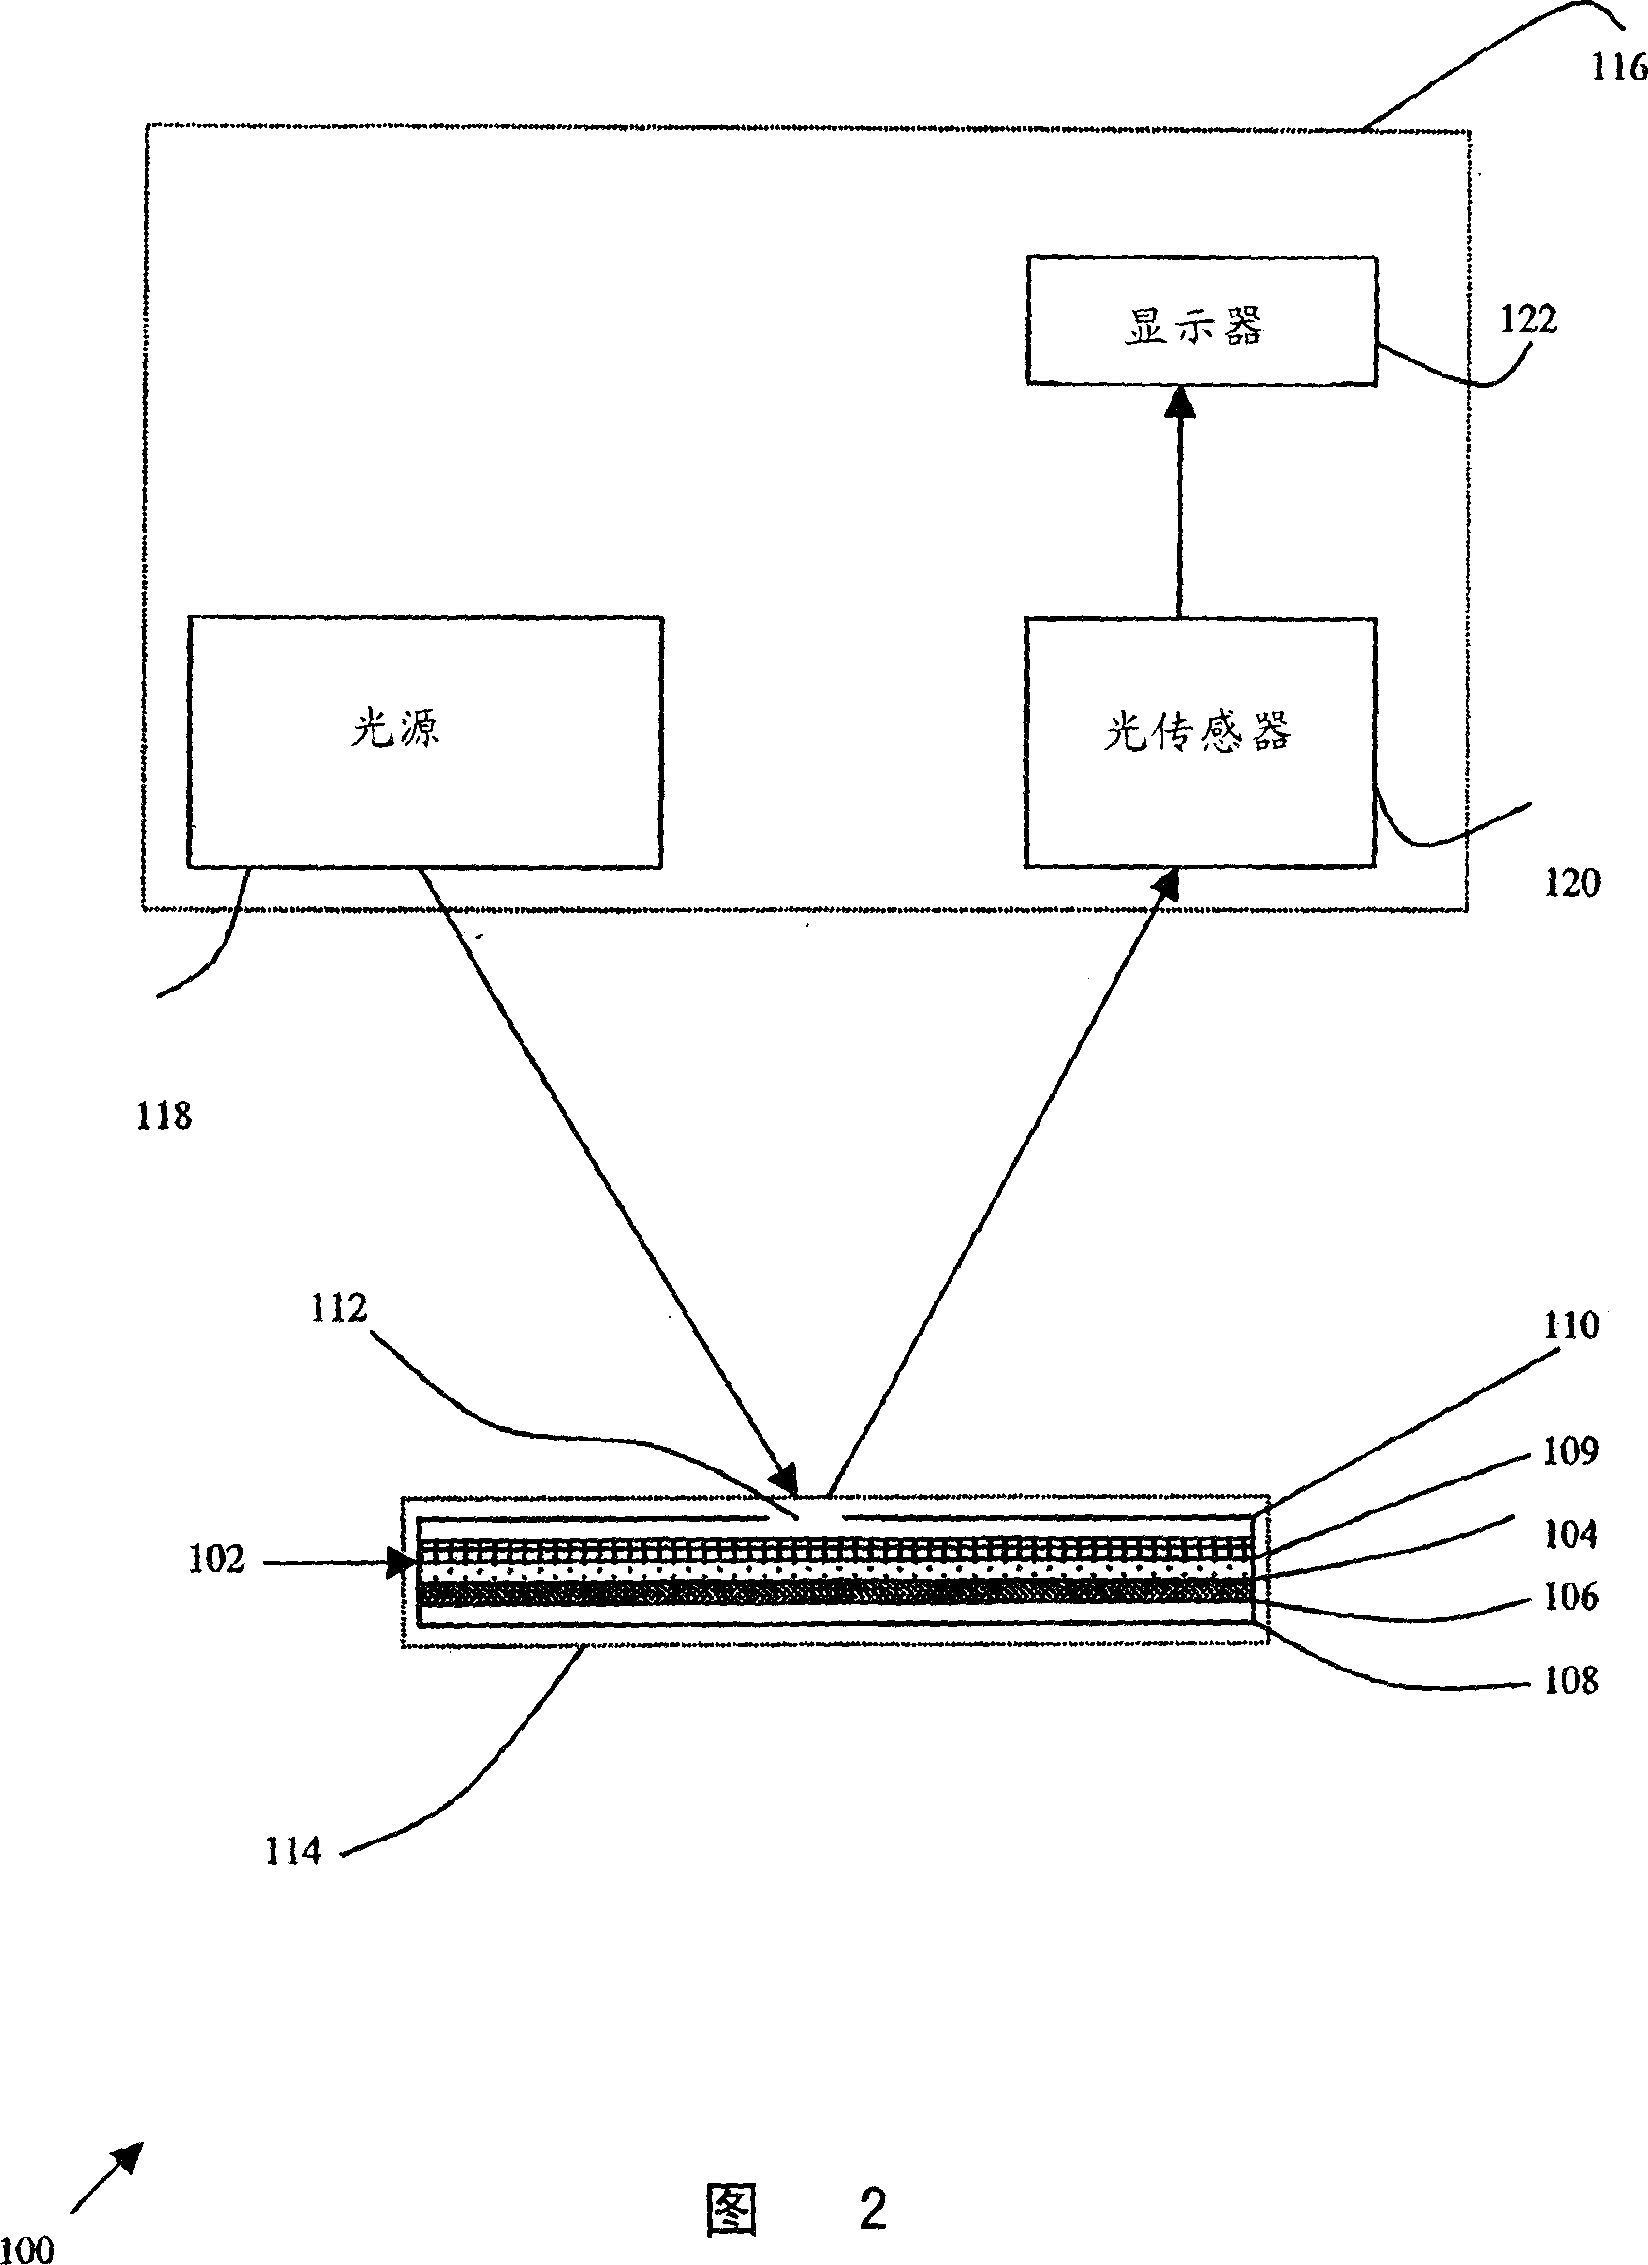 Particle agglutination detection method and device